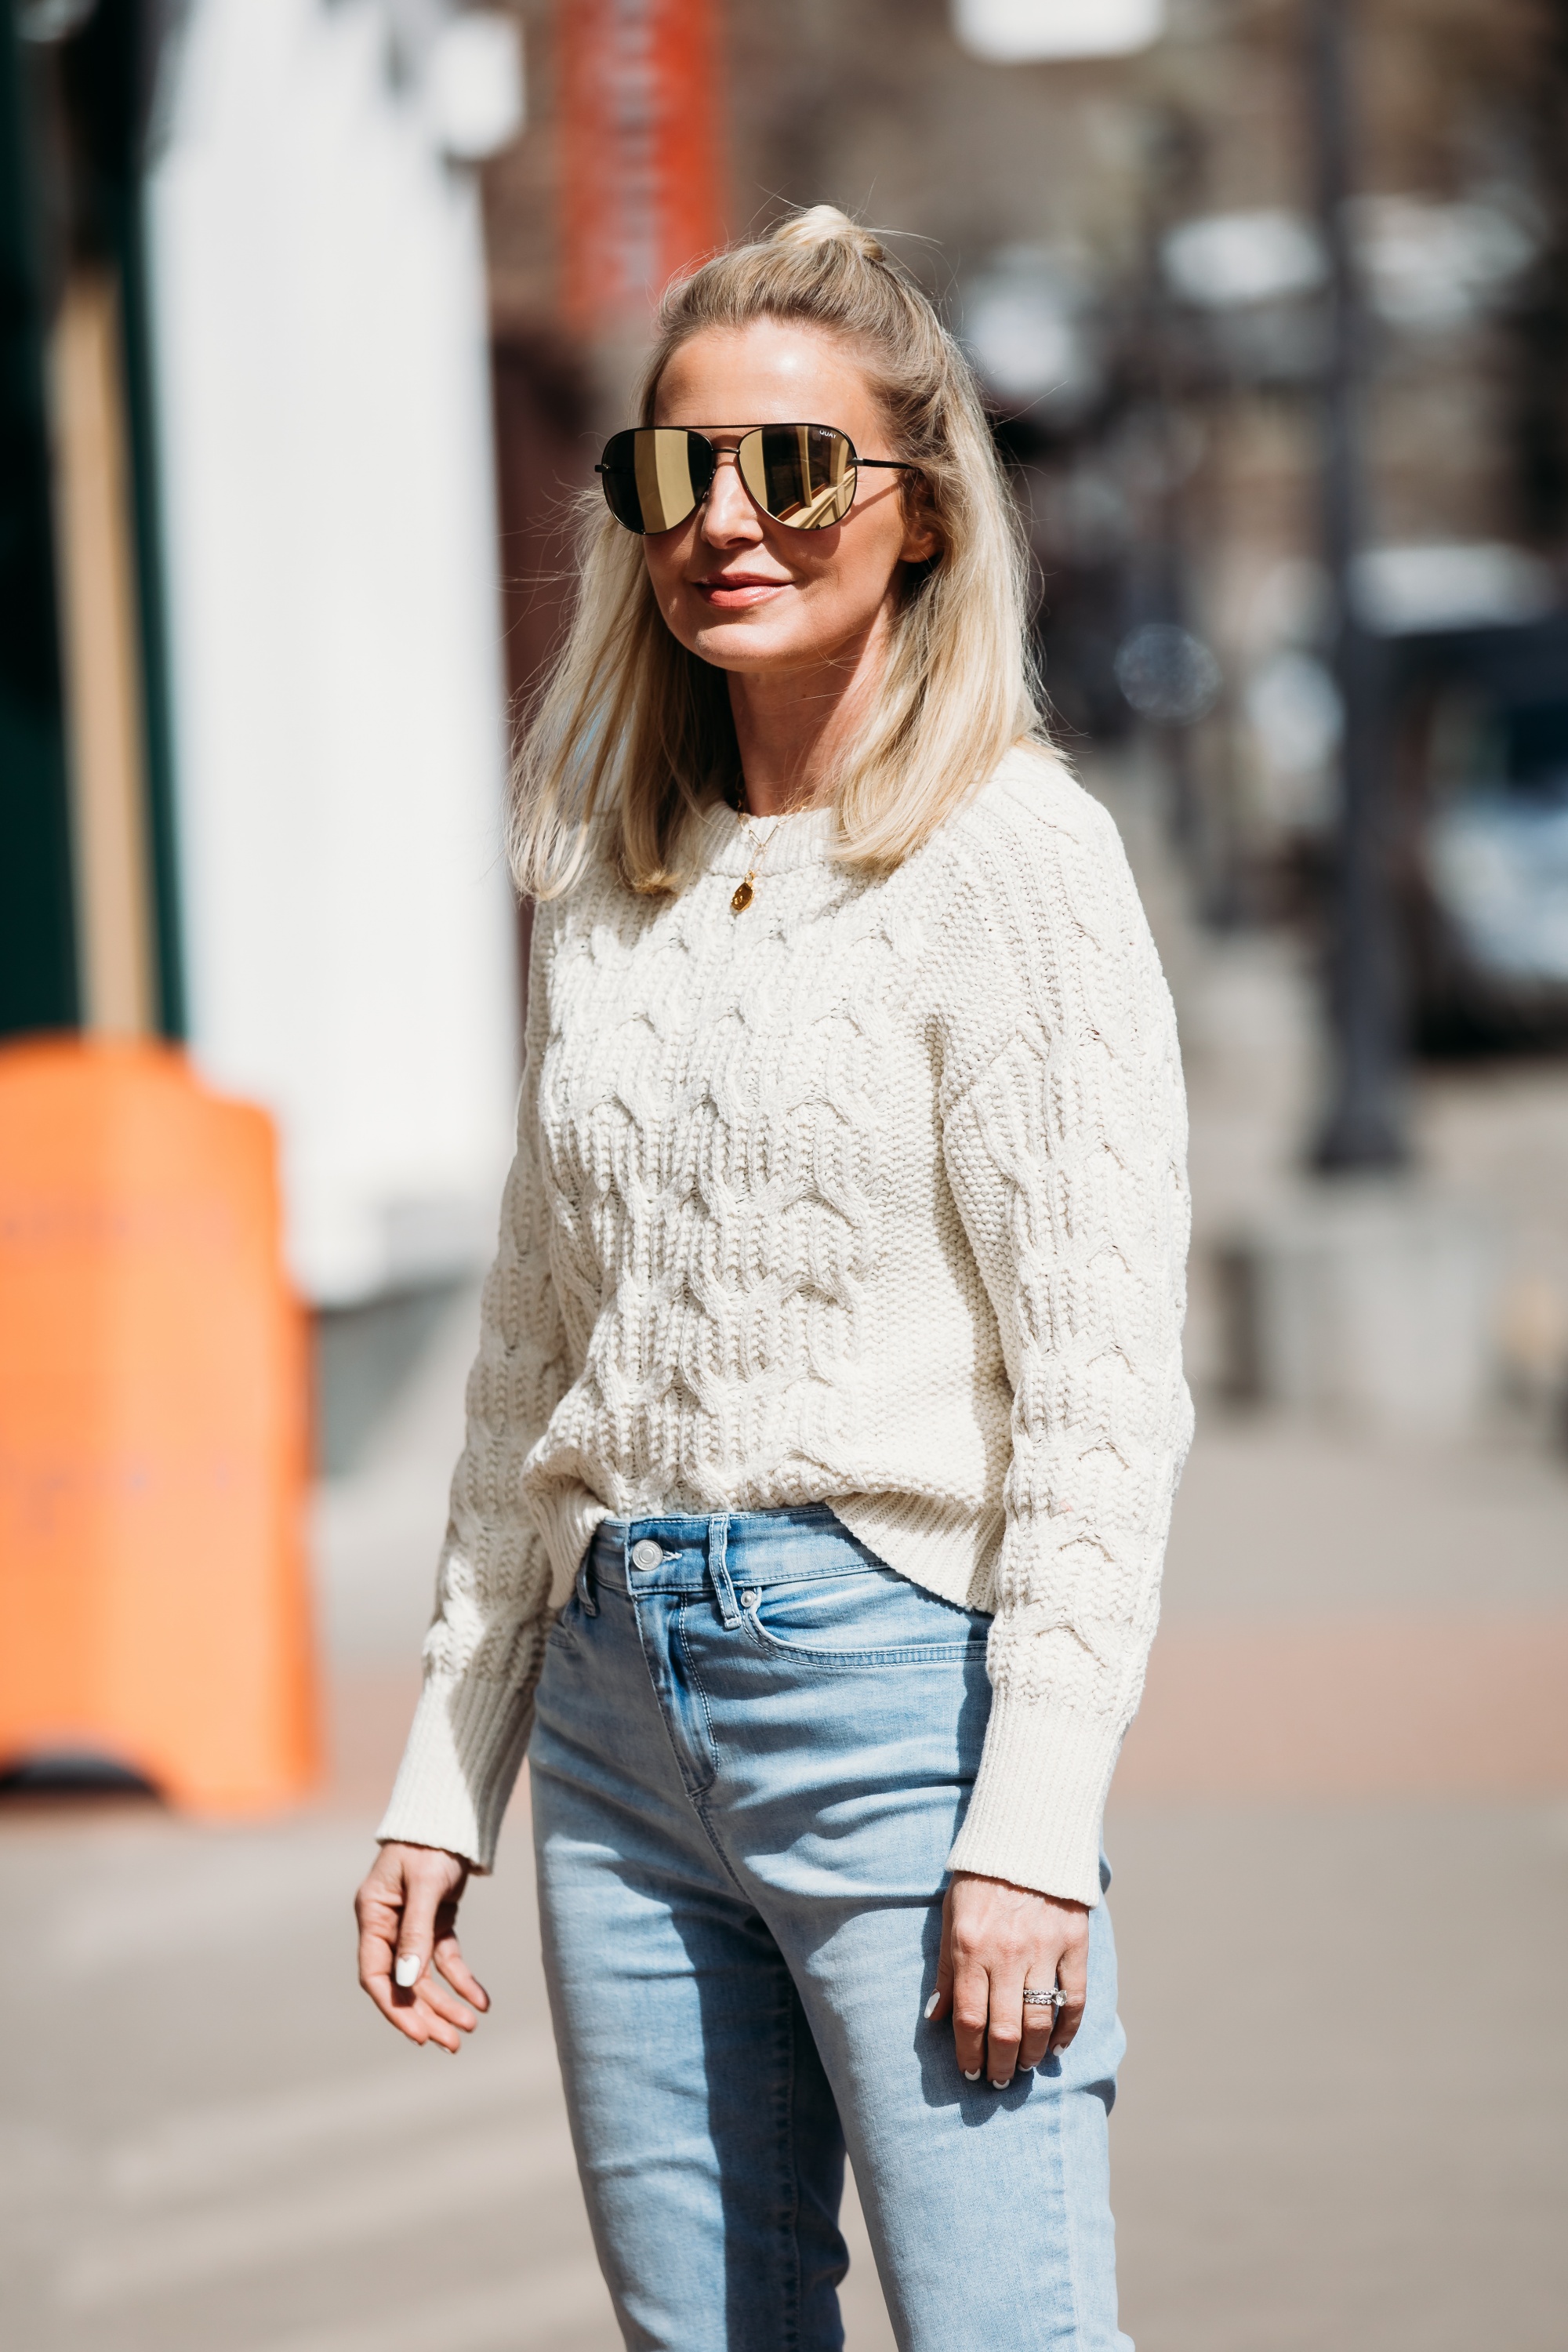 White Sweaters, Fashion blogger Erin Busbee of BusbeeStyle.com wearing a white cable knit sweater by Scoop, light wash skinny jeans by Sofia Vergara, brown suede booties, and green mirrored QUAY sunglasses from Walmart in Telluride, Colorado